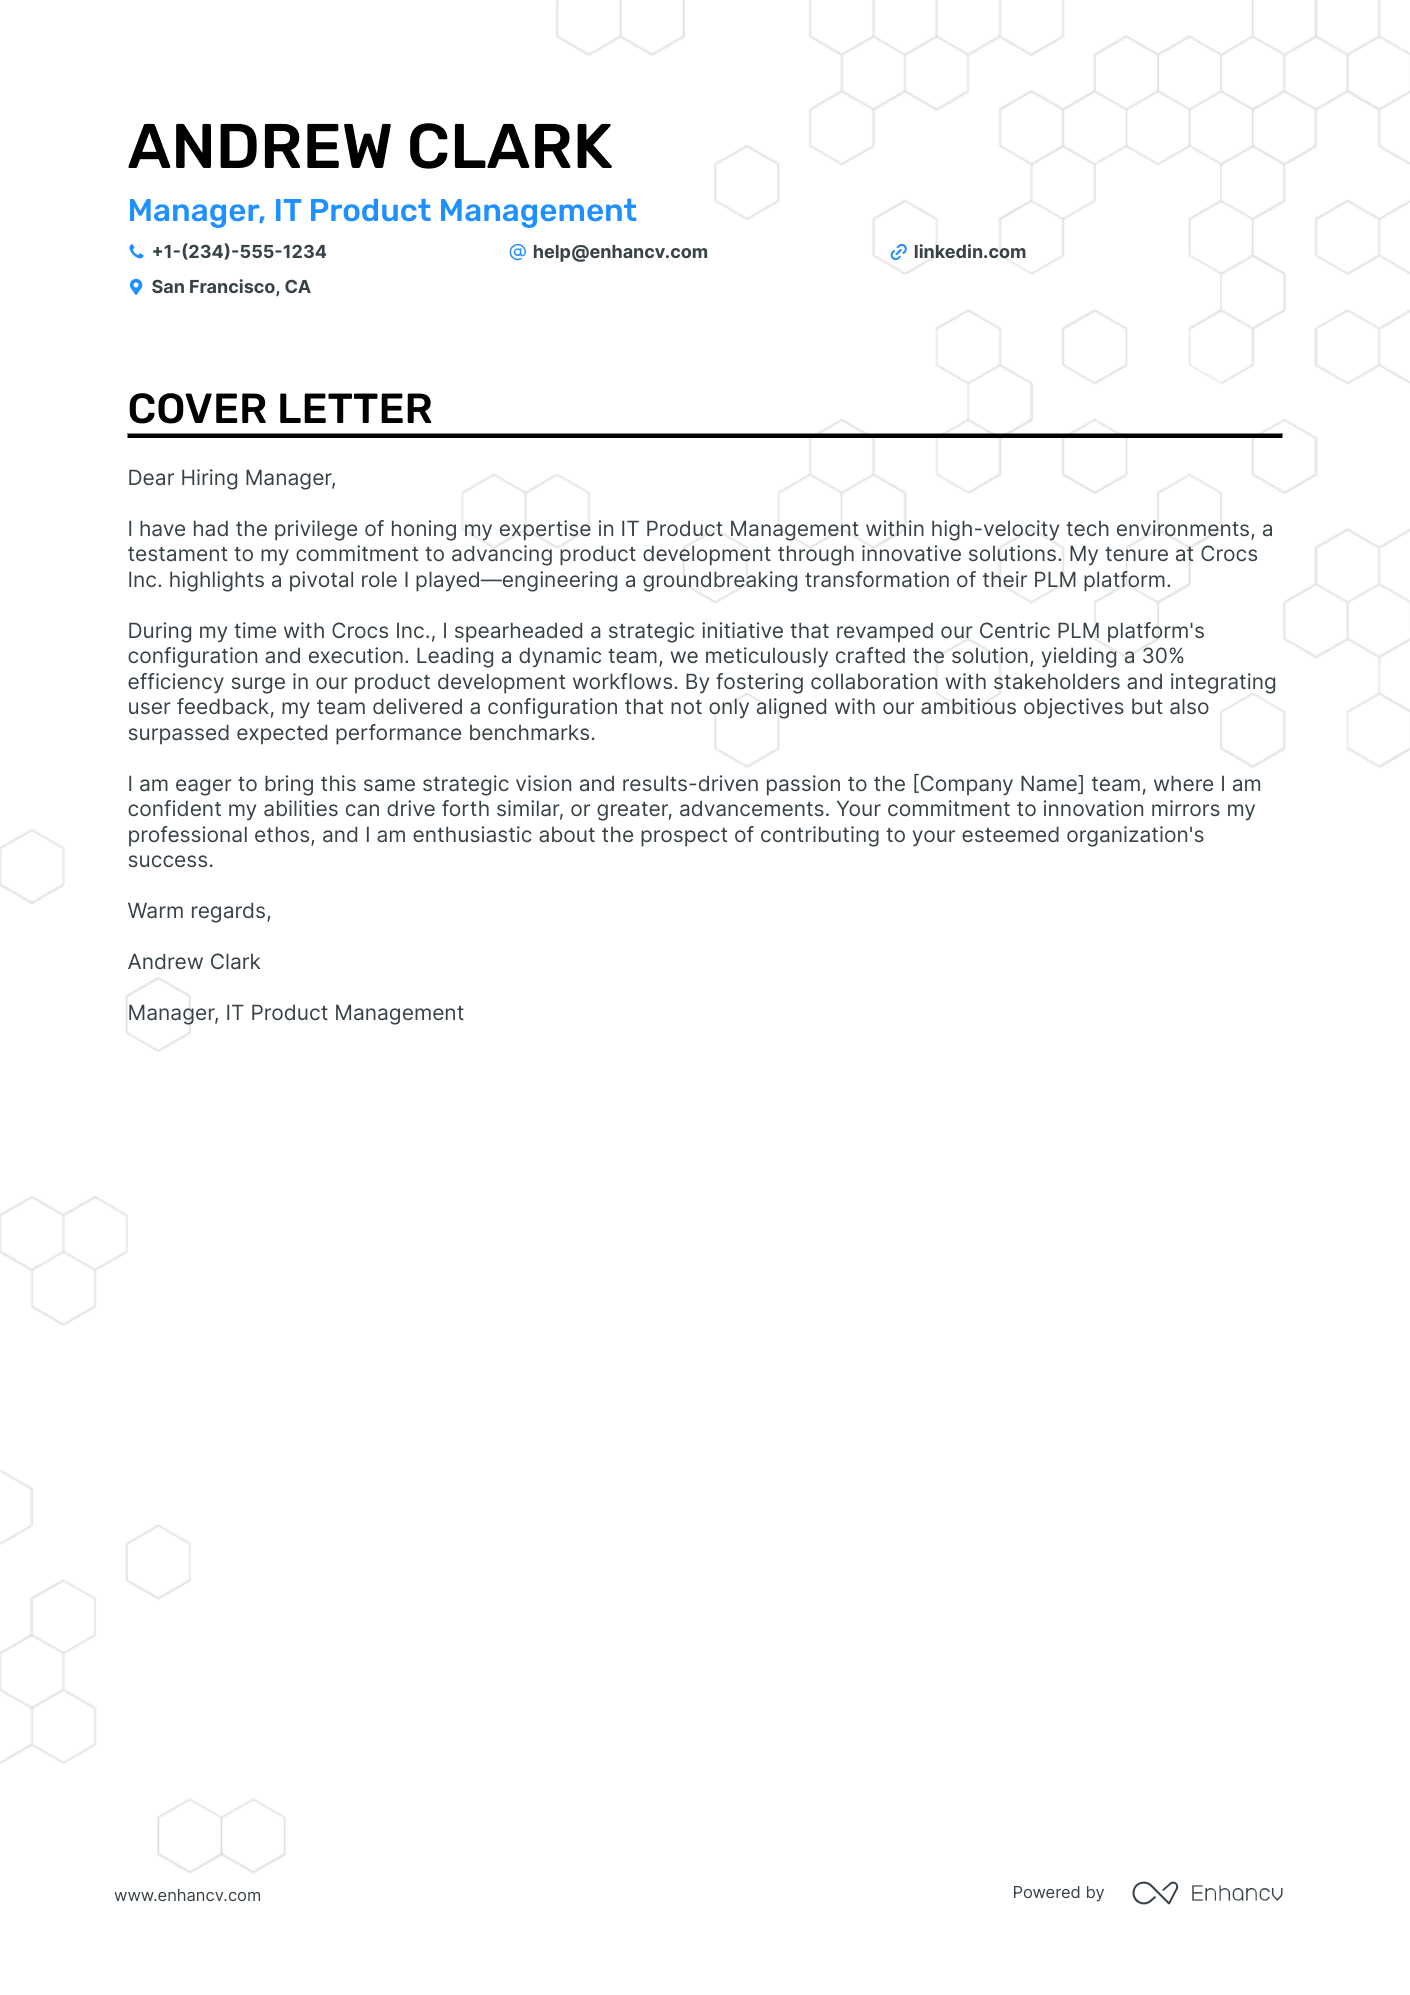 IT Product Manager cover letter